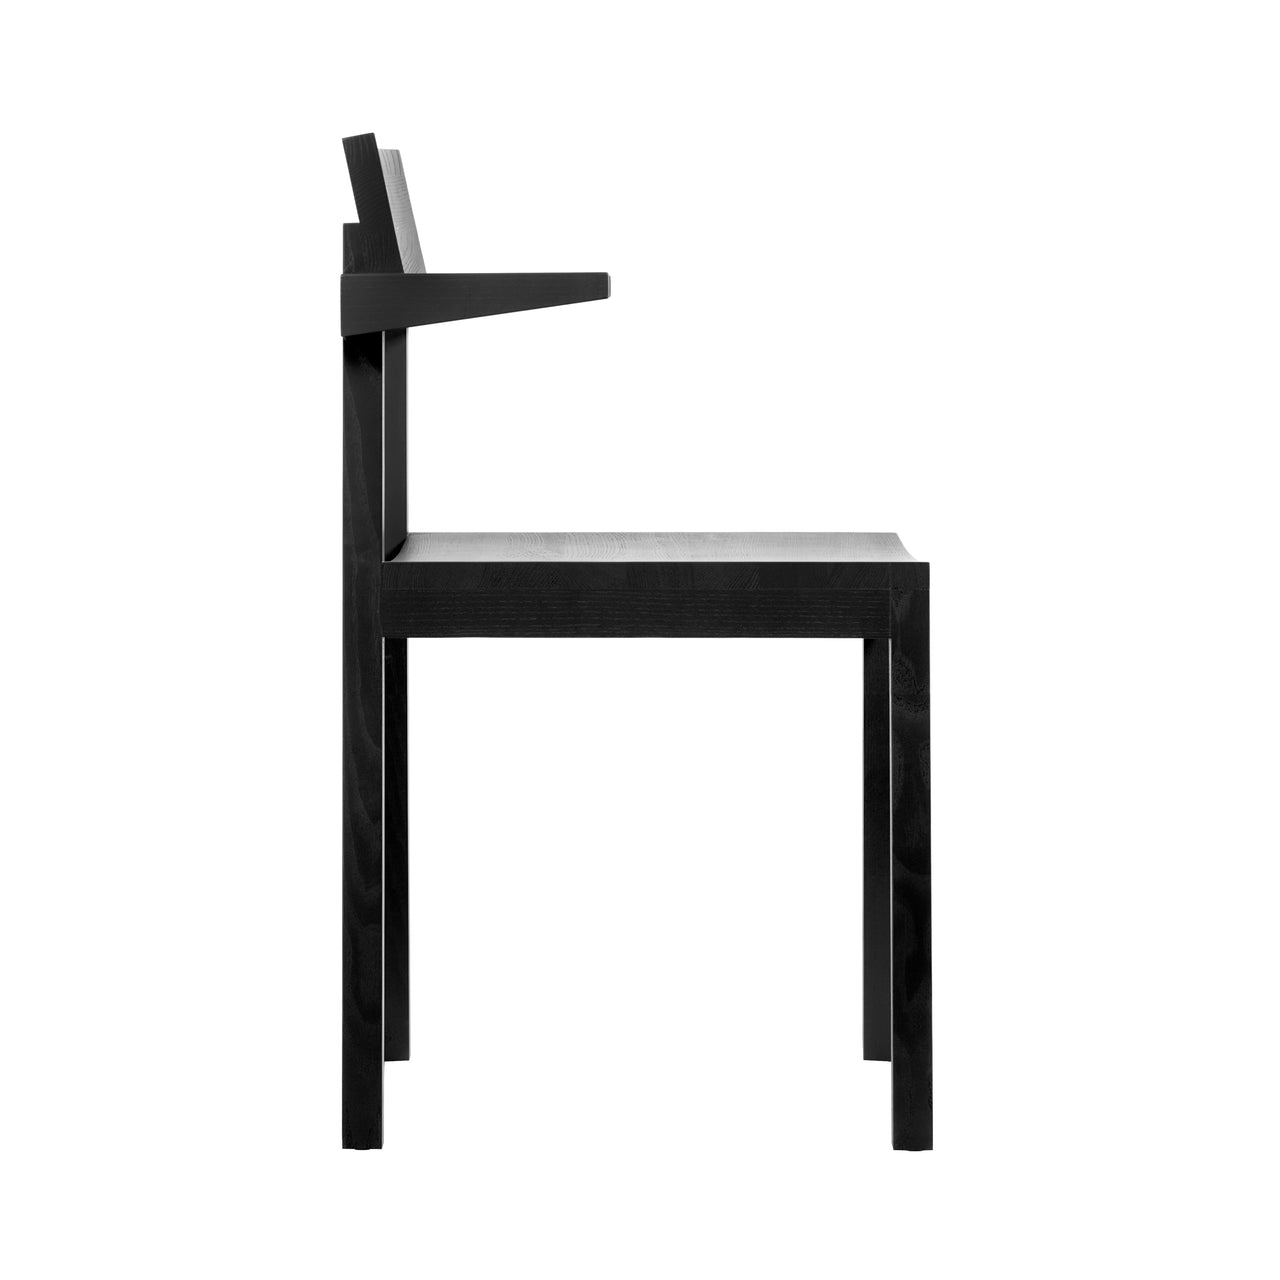 Silent Chair: With Arm + Coal